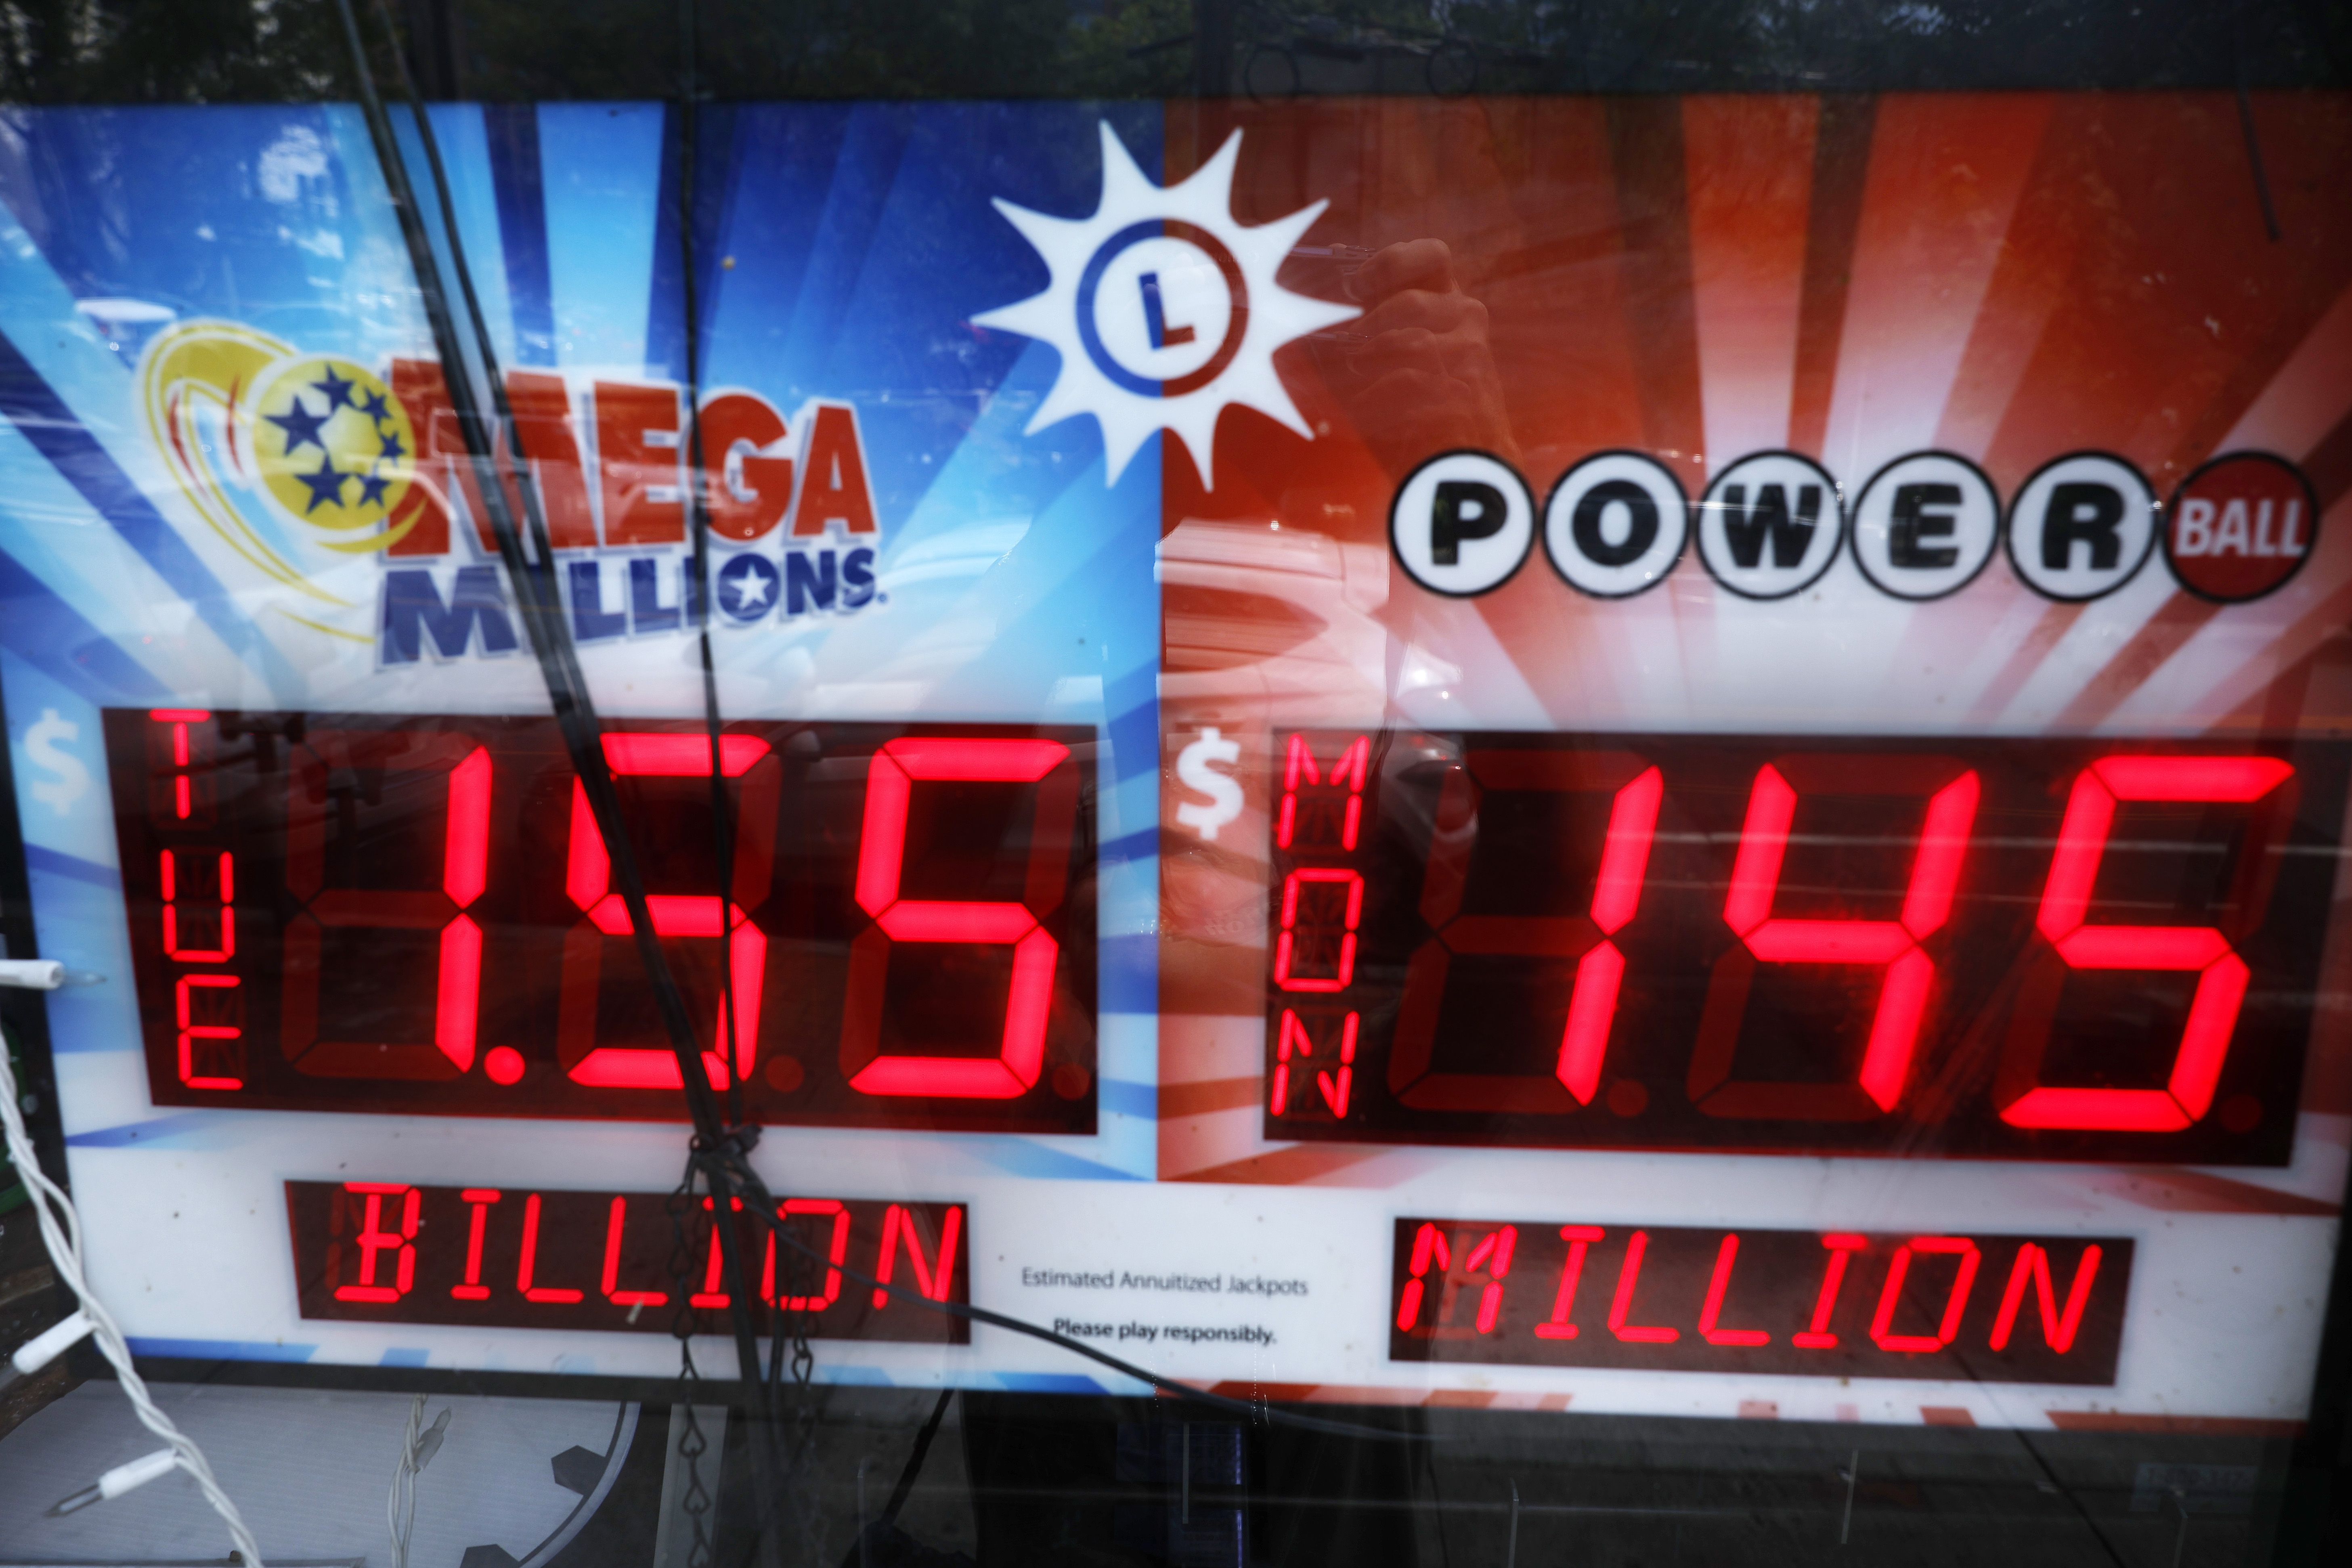 Electronic signs shows Mega Millions and Powerball jackpots 